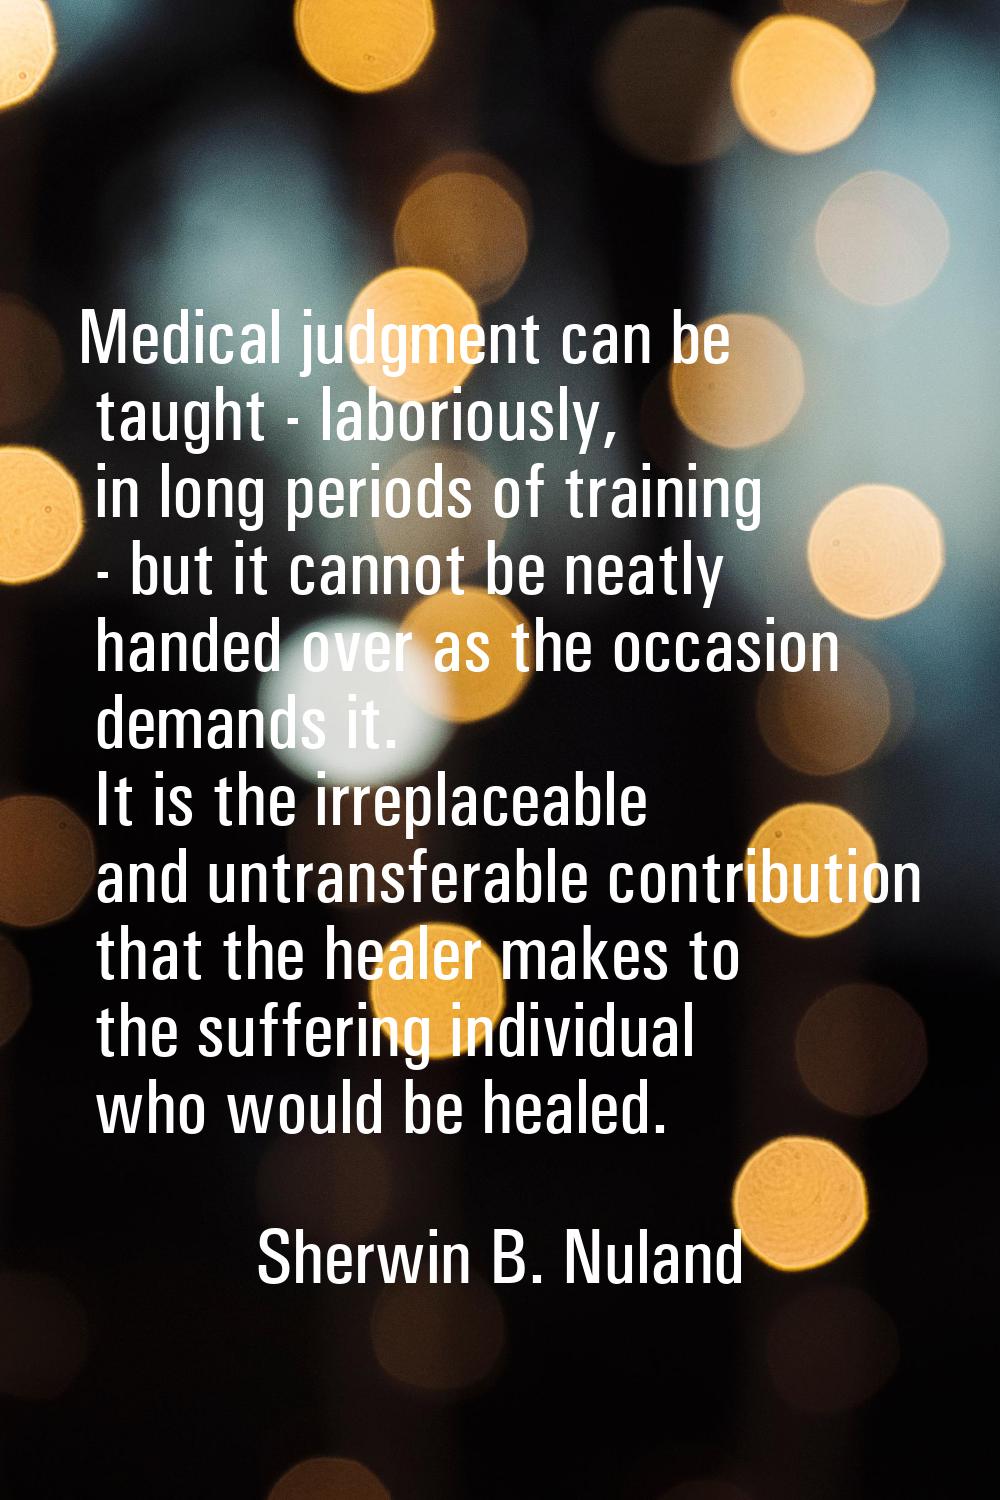 Medical judgment can be taught - laboriously, in long periods of training - but it cannot be neatly